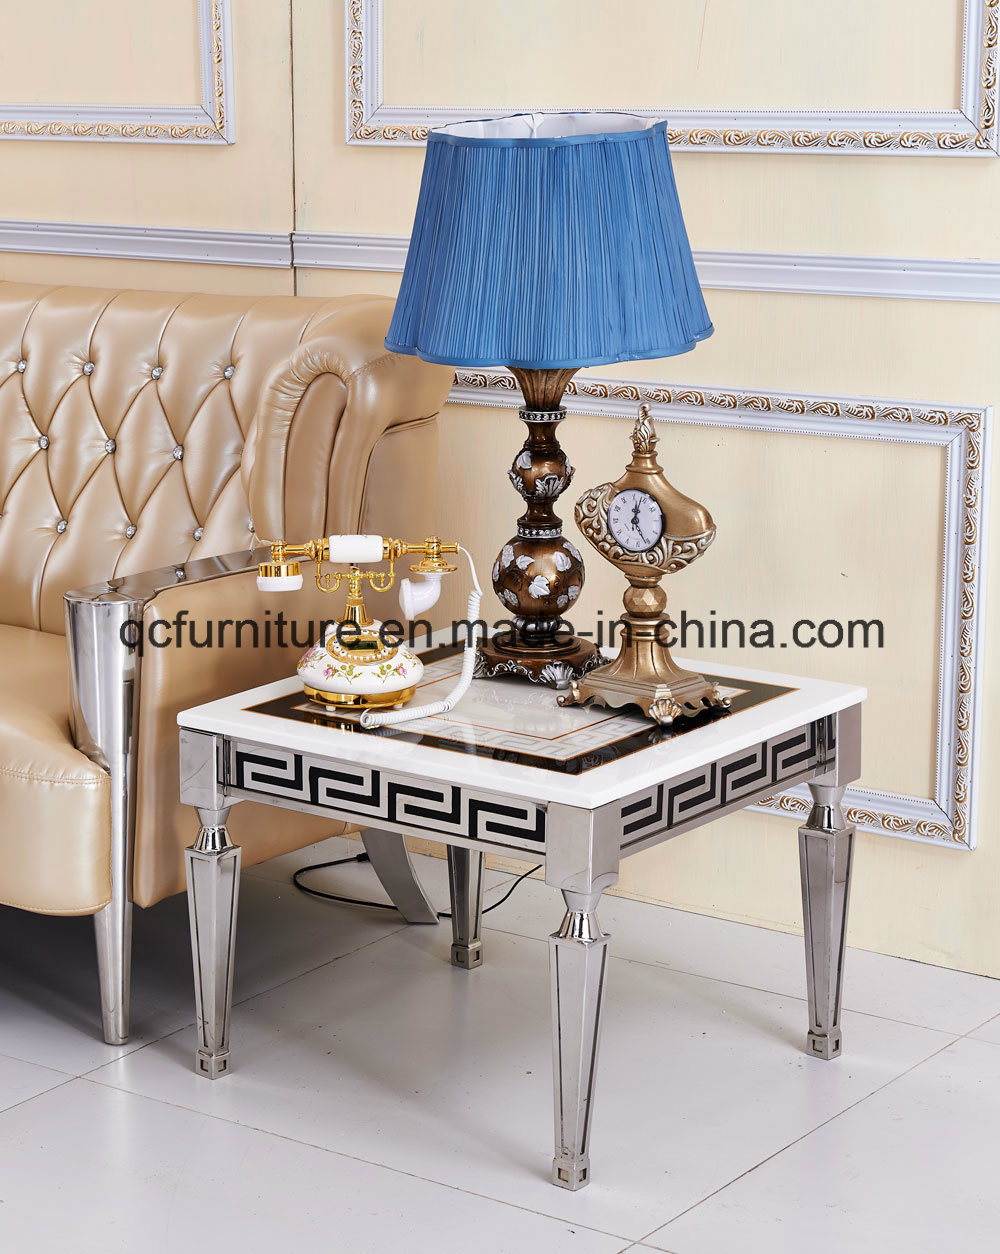 Four Stainless Steel Leg Side Table 887#